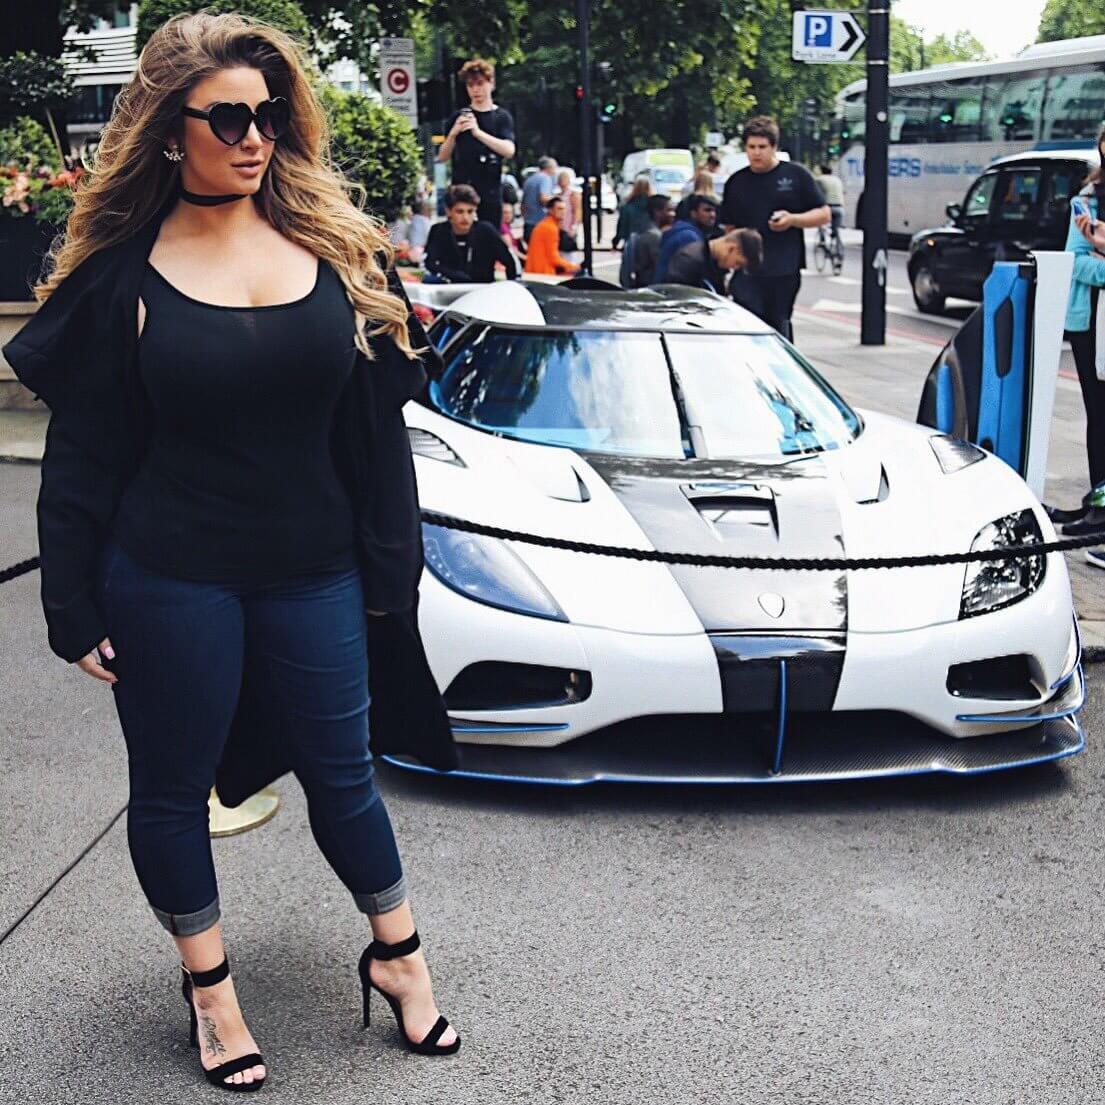 Hot Pictures Of Ashley Alexiss Which Will Make Your Day The Viraler Hot Sex Picture